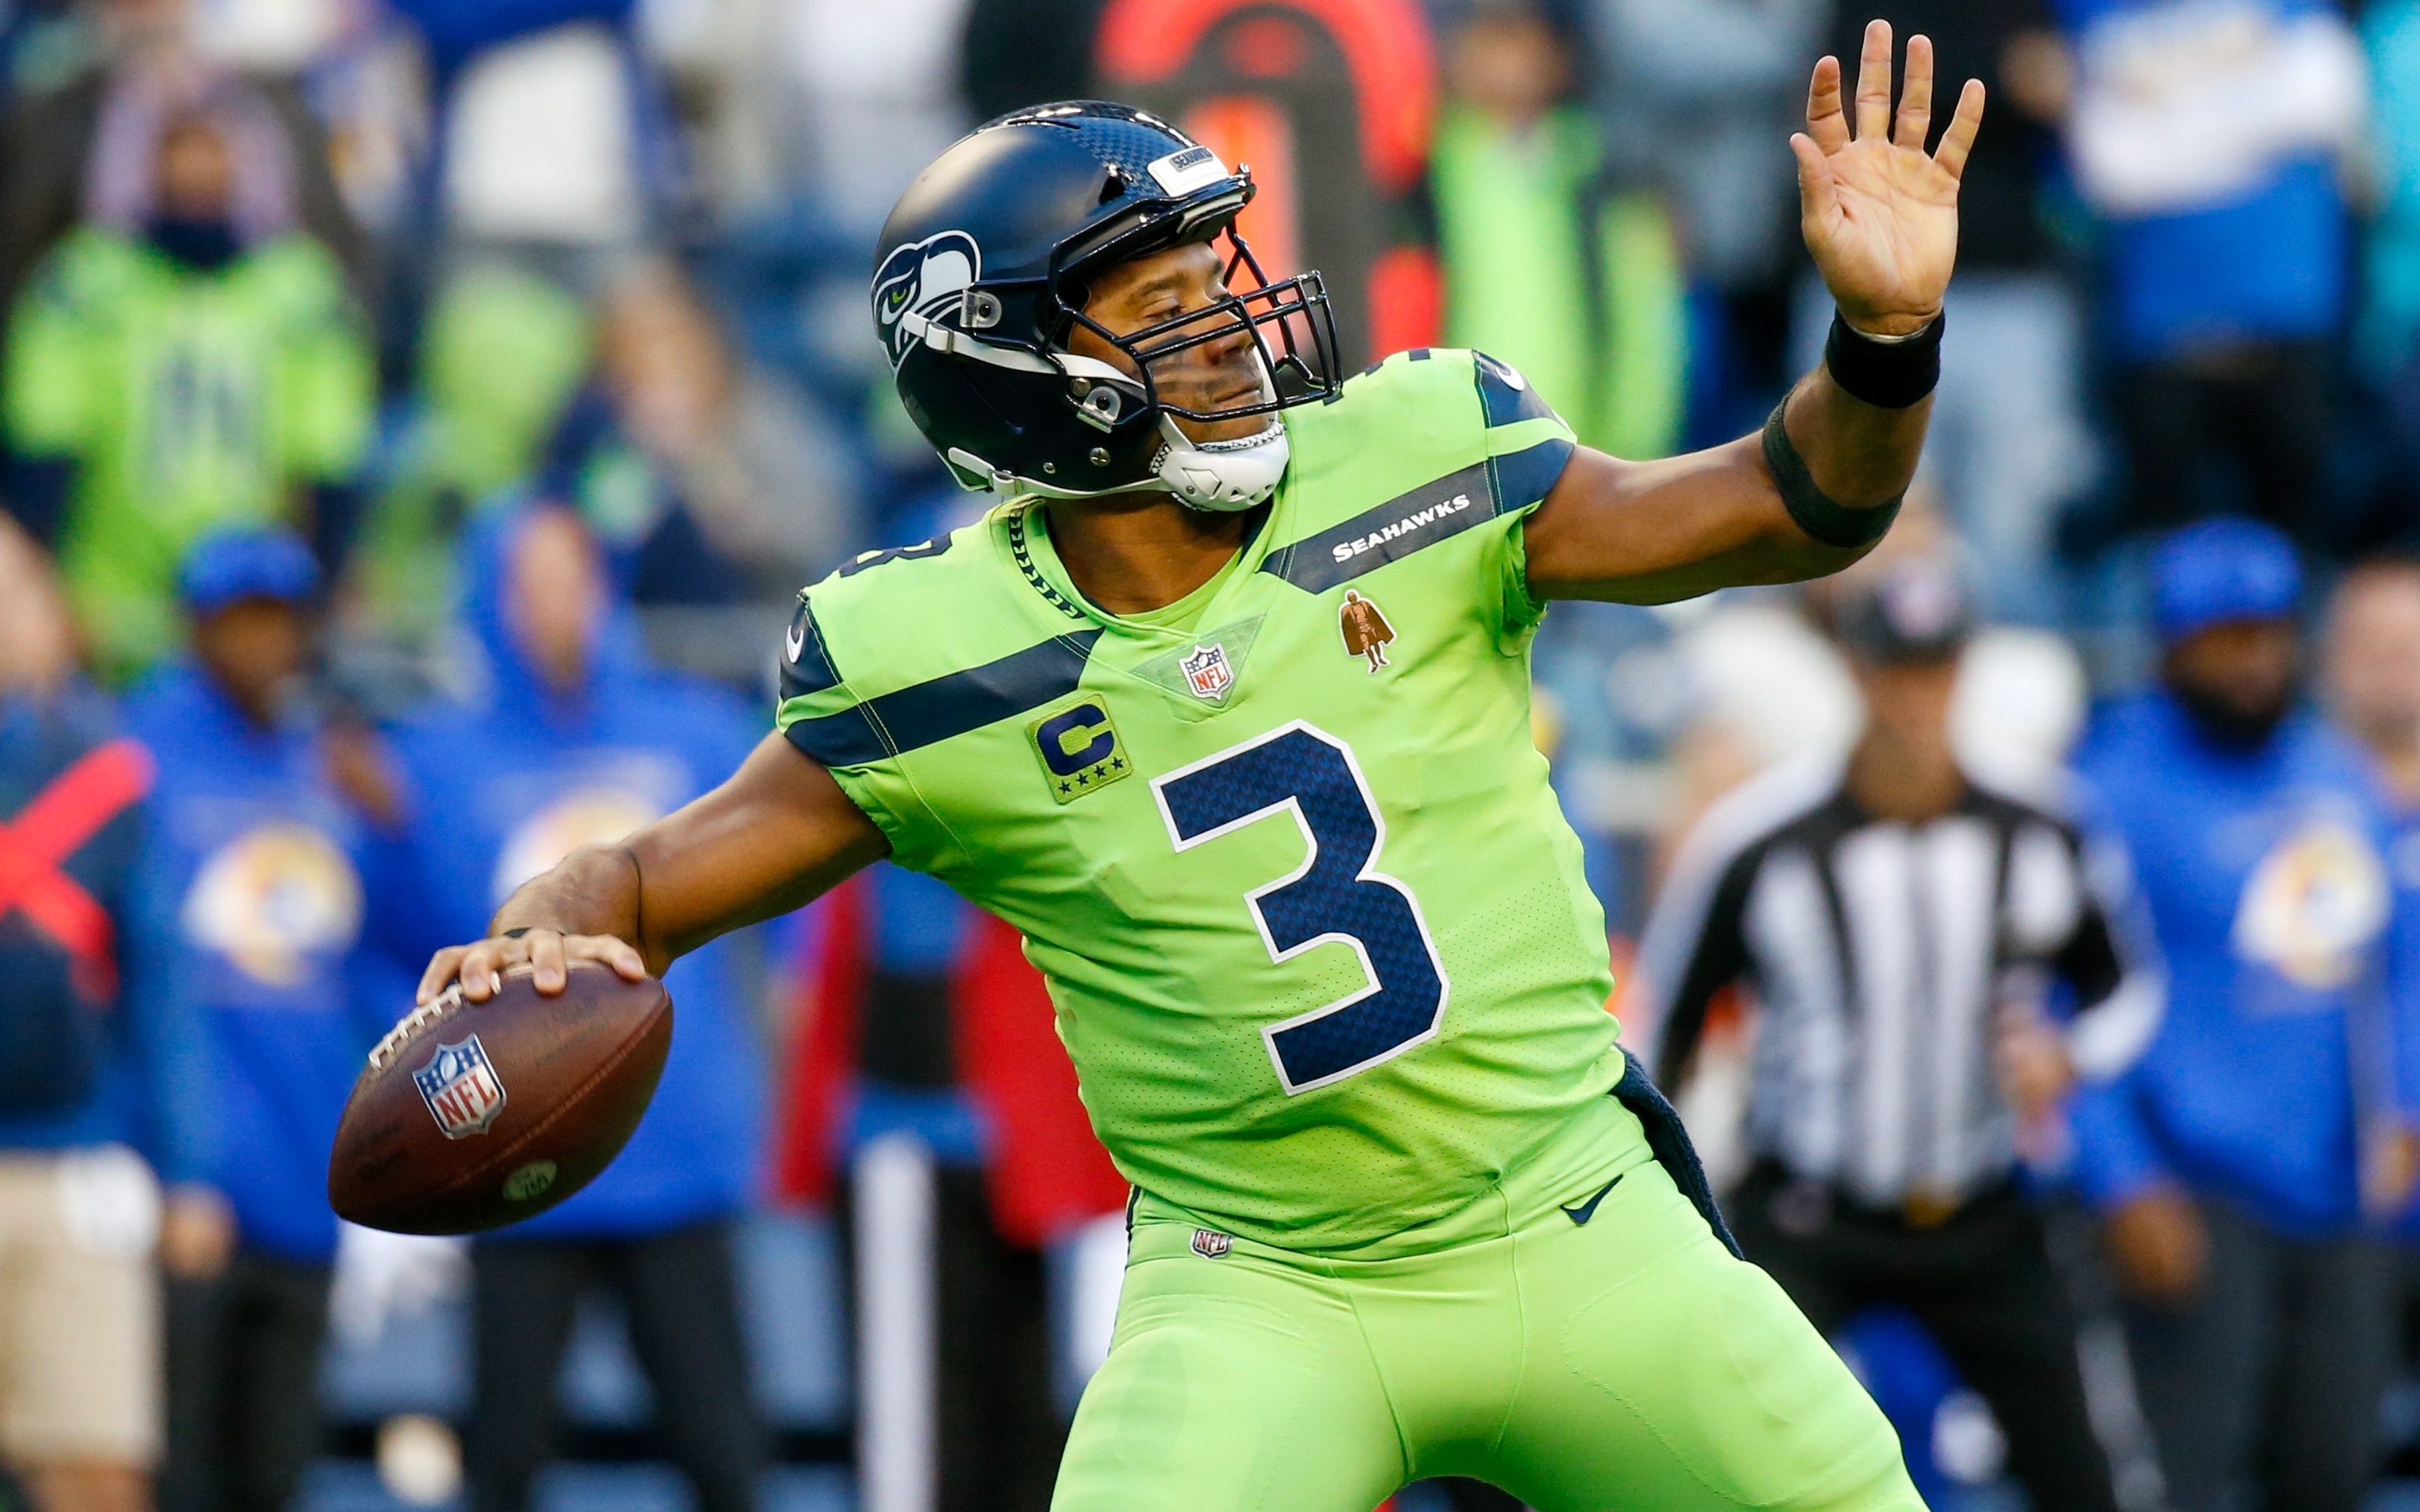 Russell Wilson throws deep against the Rams. Credit: Joe Nicholson, USA TODAY Sports.